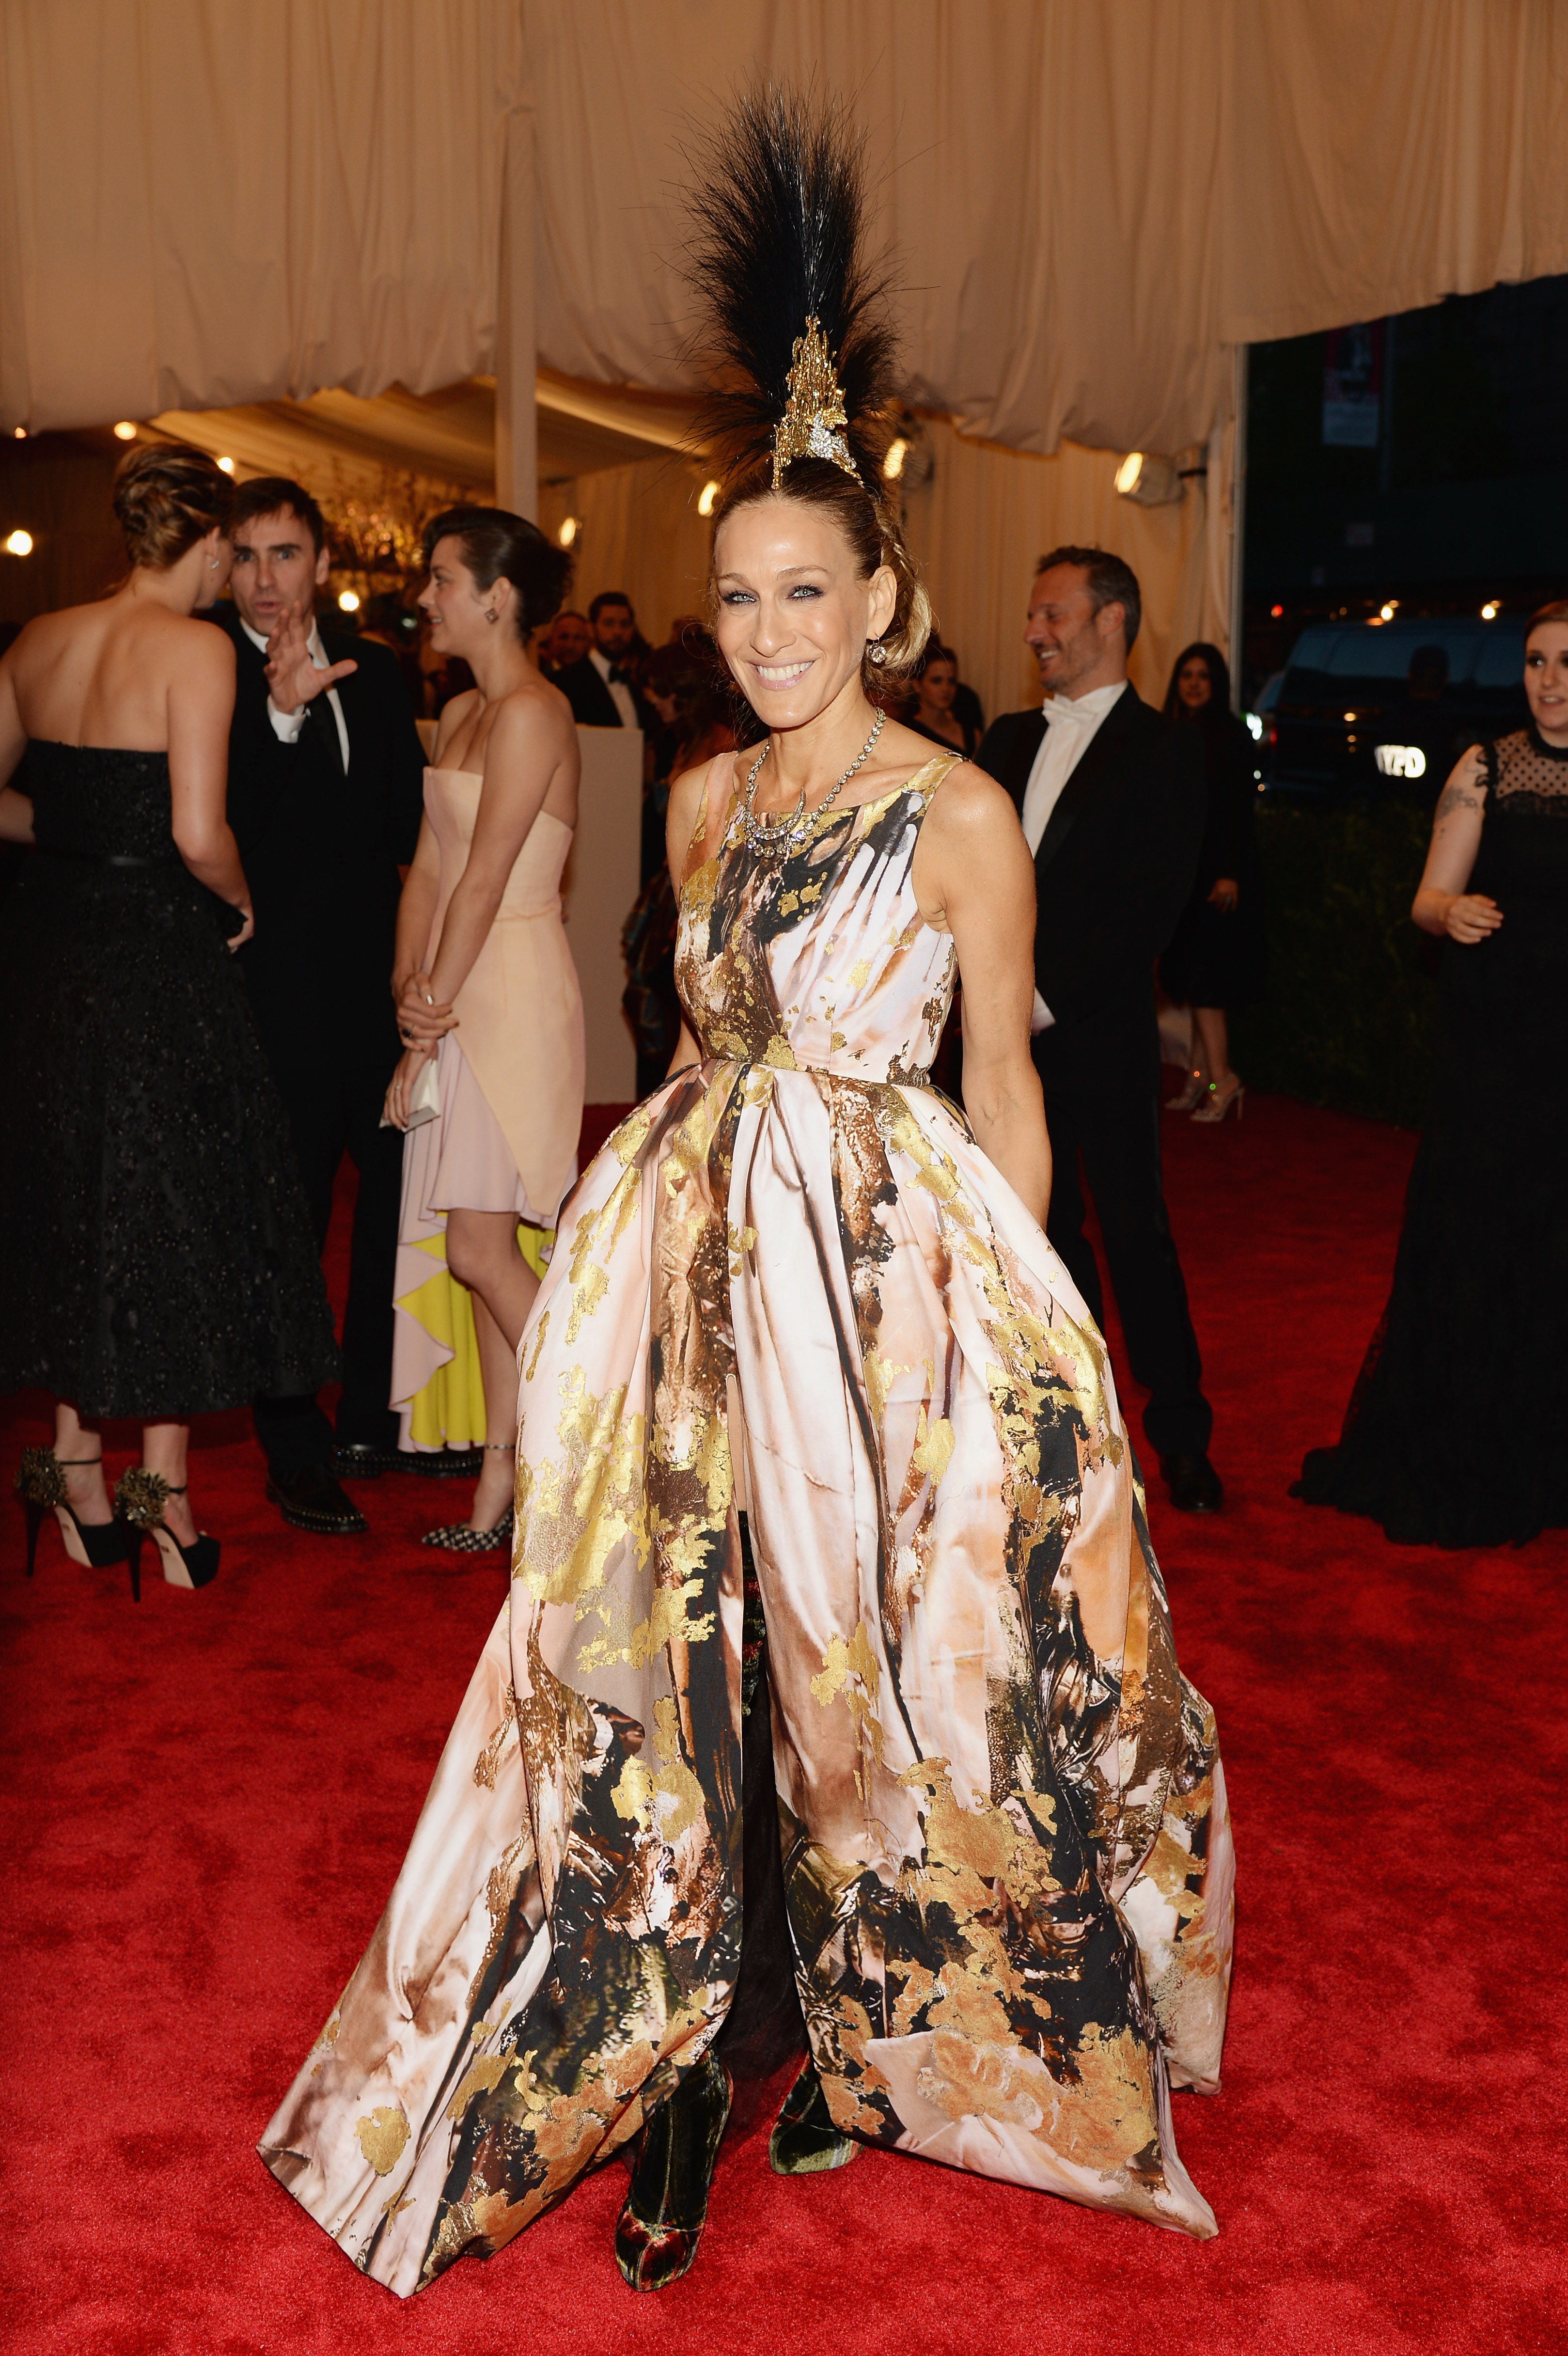 NEW YORK, NY - MAY 06: Sarah Jessica Parker attends the Costume Institute Gala for the 